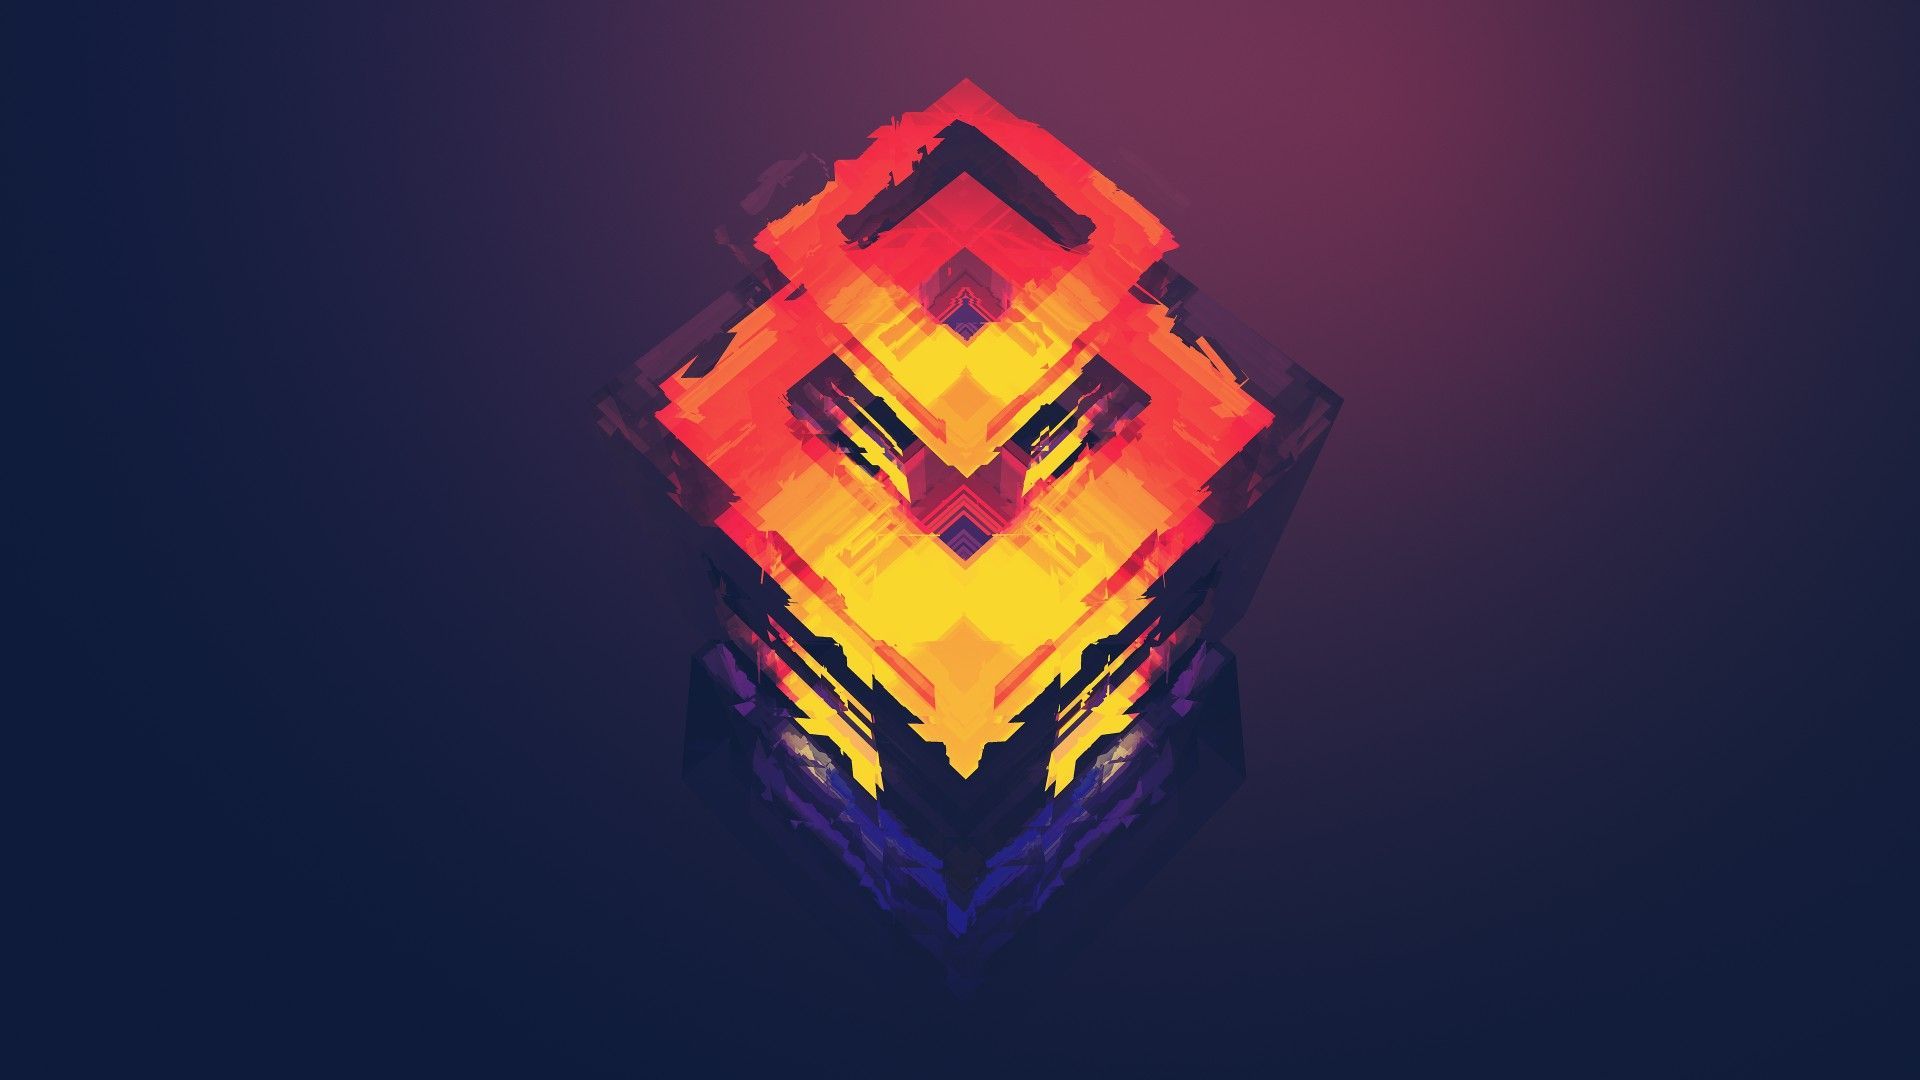 Discord Engine Wallpapers